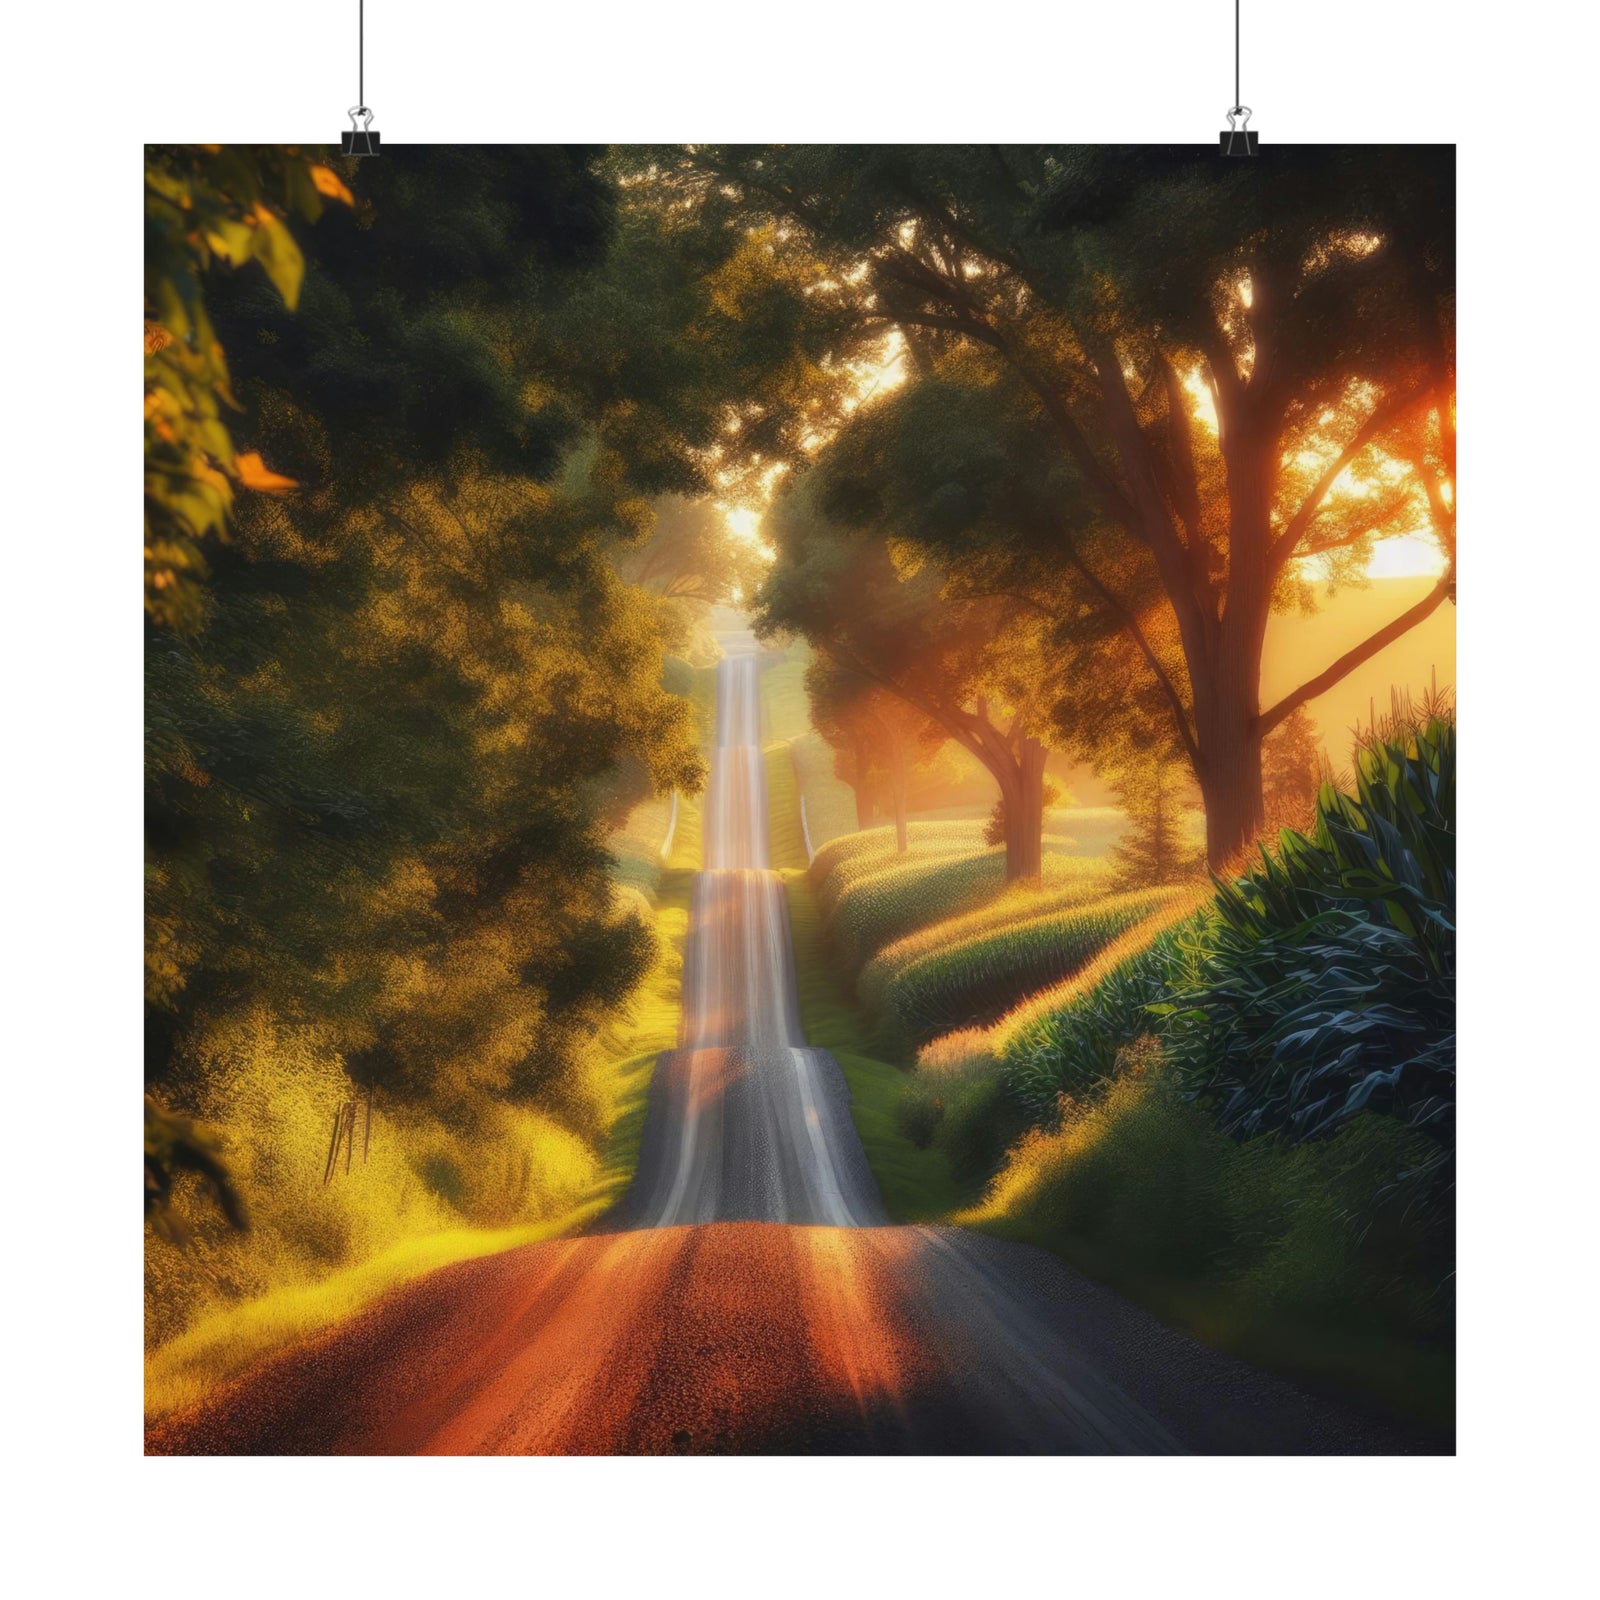 The Sun-Drenched Way Poster